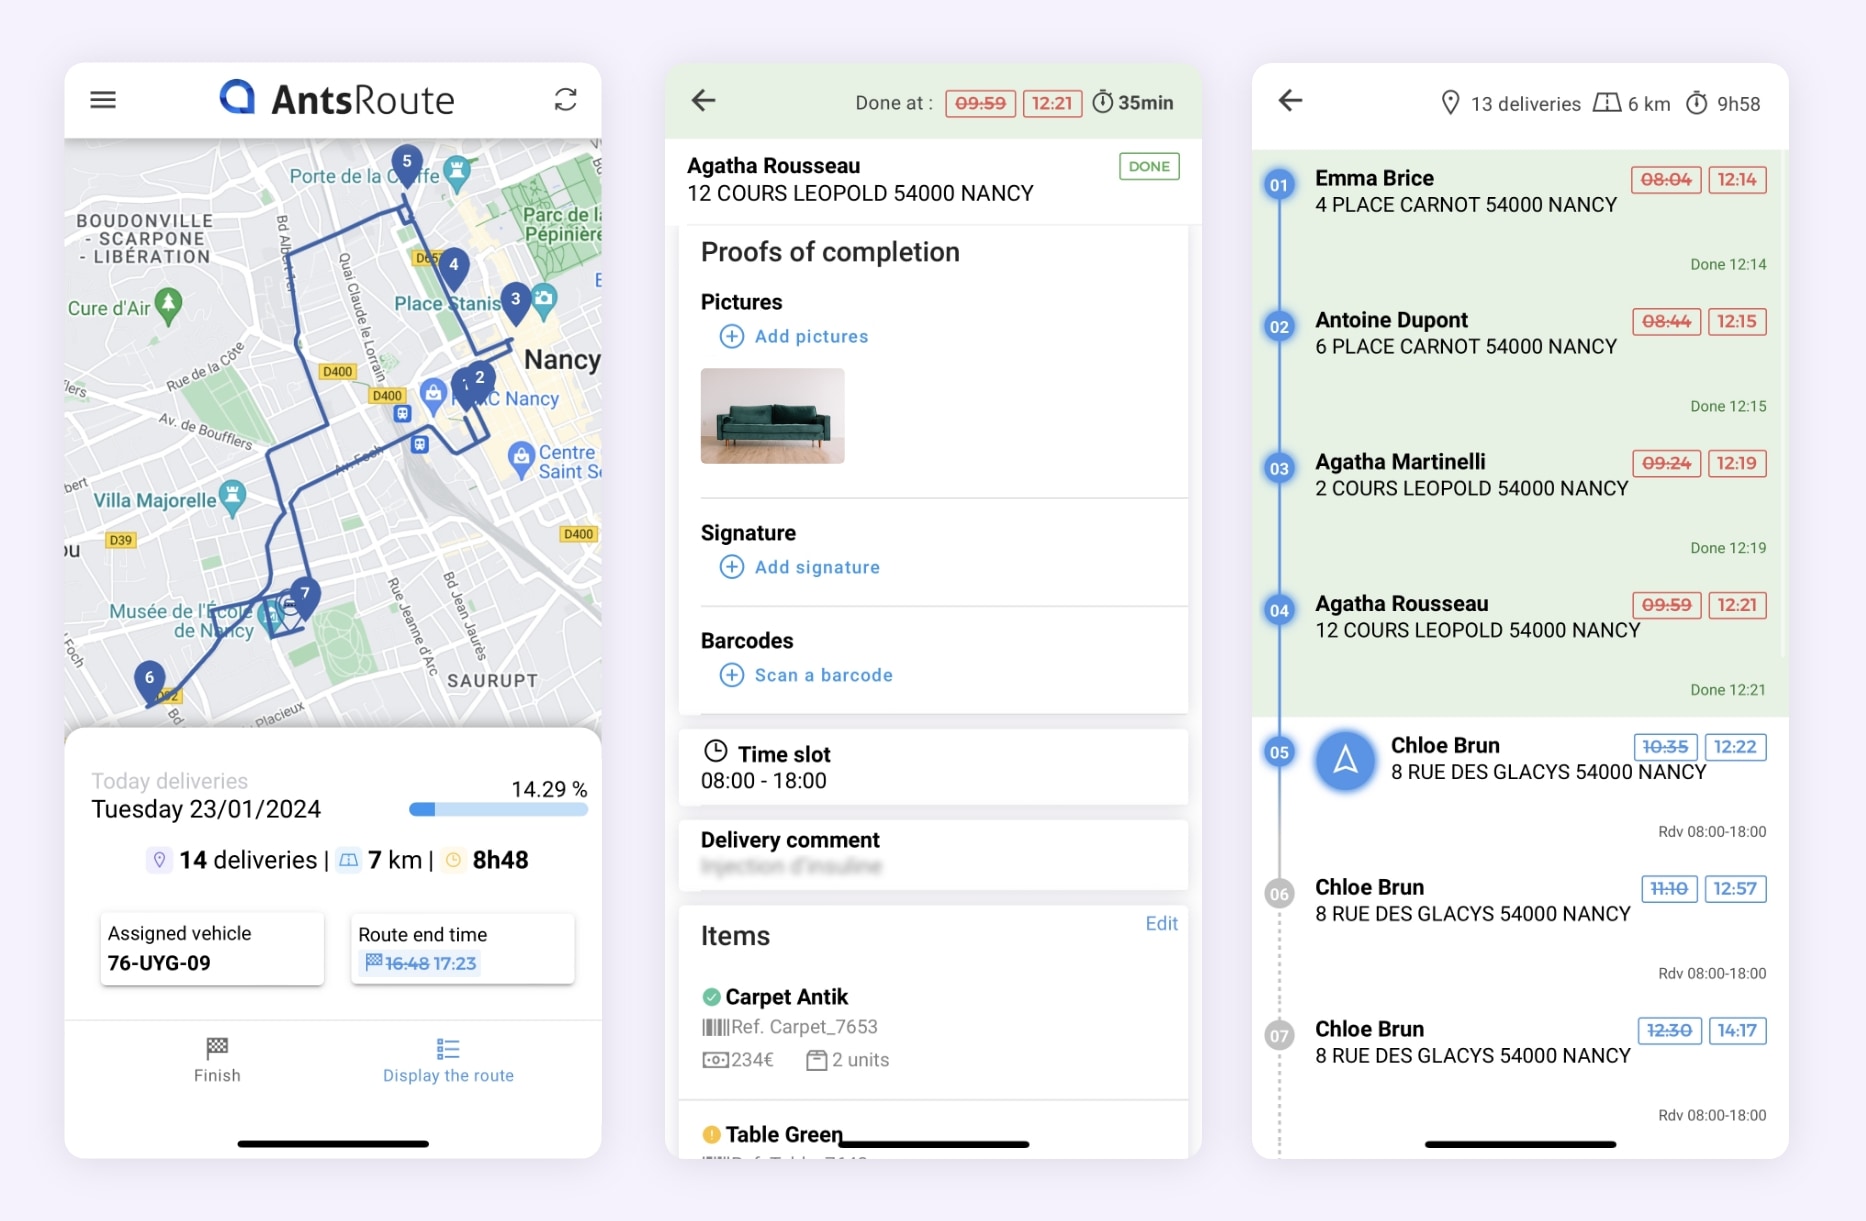 The AntsRoute mobile application showing information on deliveries.